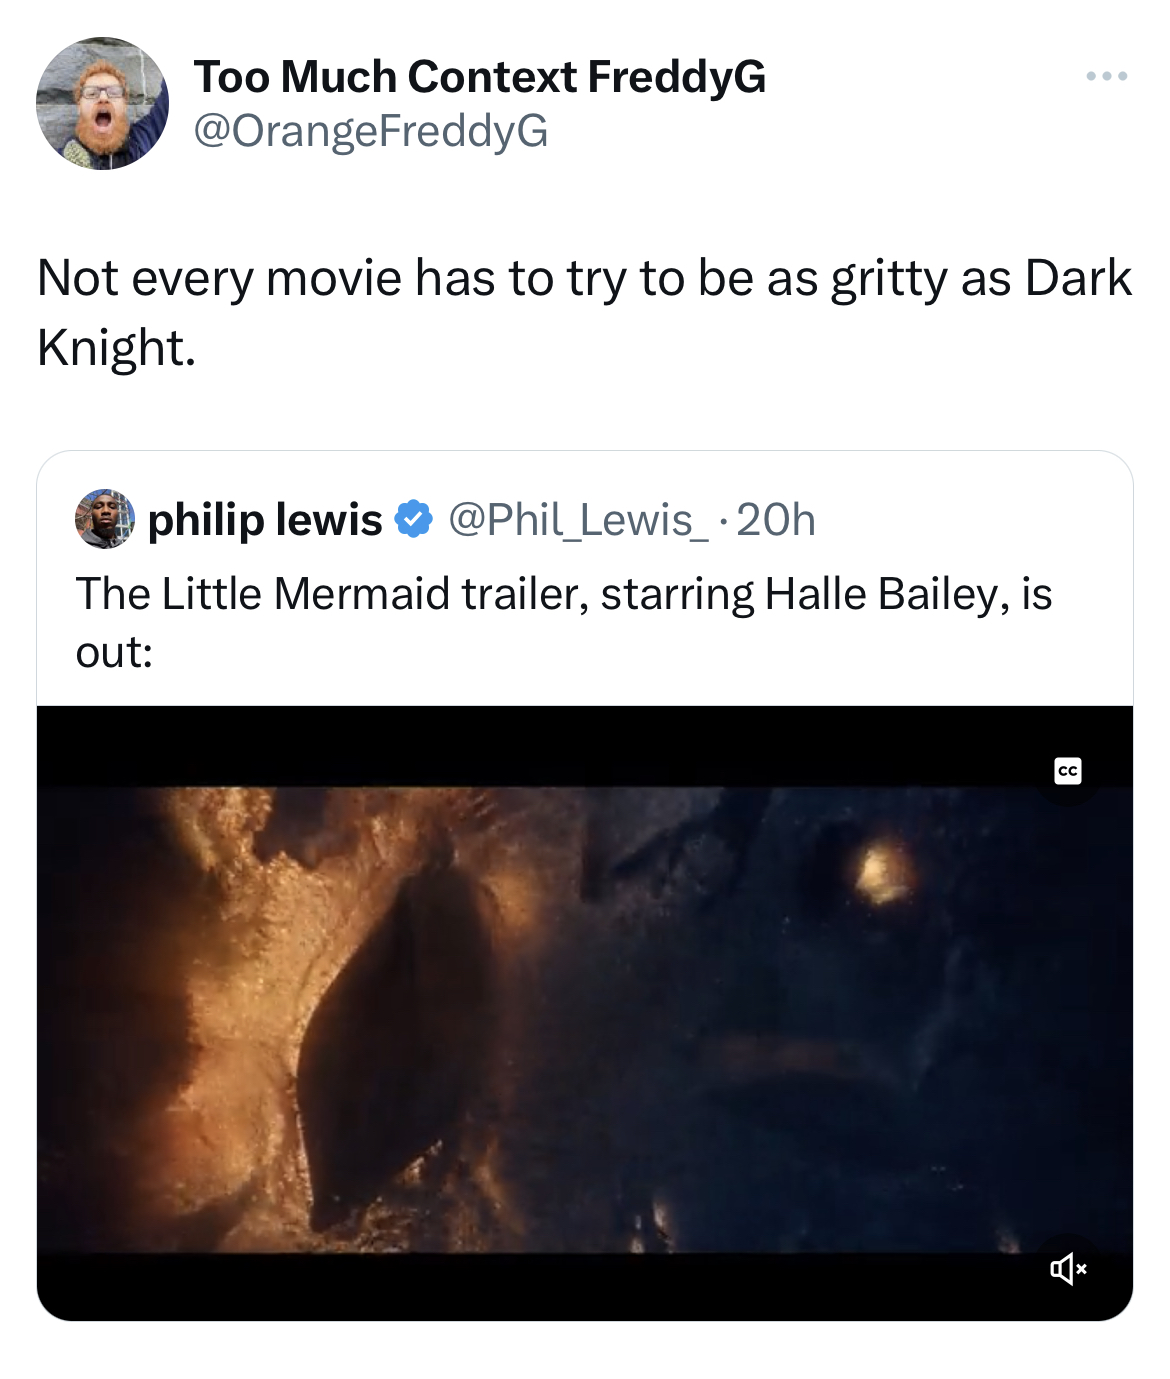 savage tweets - heat - Too Much Context FreddyG Not every movie has to try to be as gritty as Dark Knight. philip lewis The Little Mermaid trailer, starring Halle Bailey, is out www ec 8